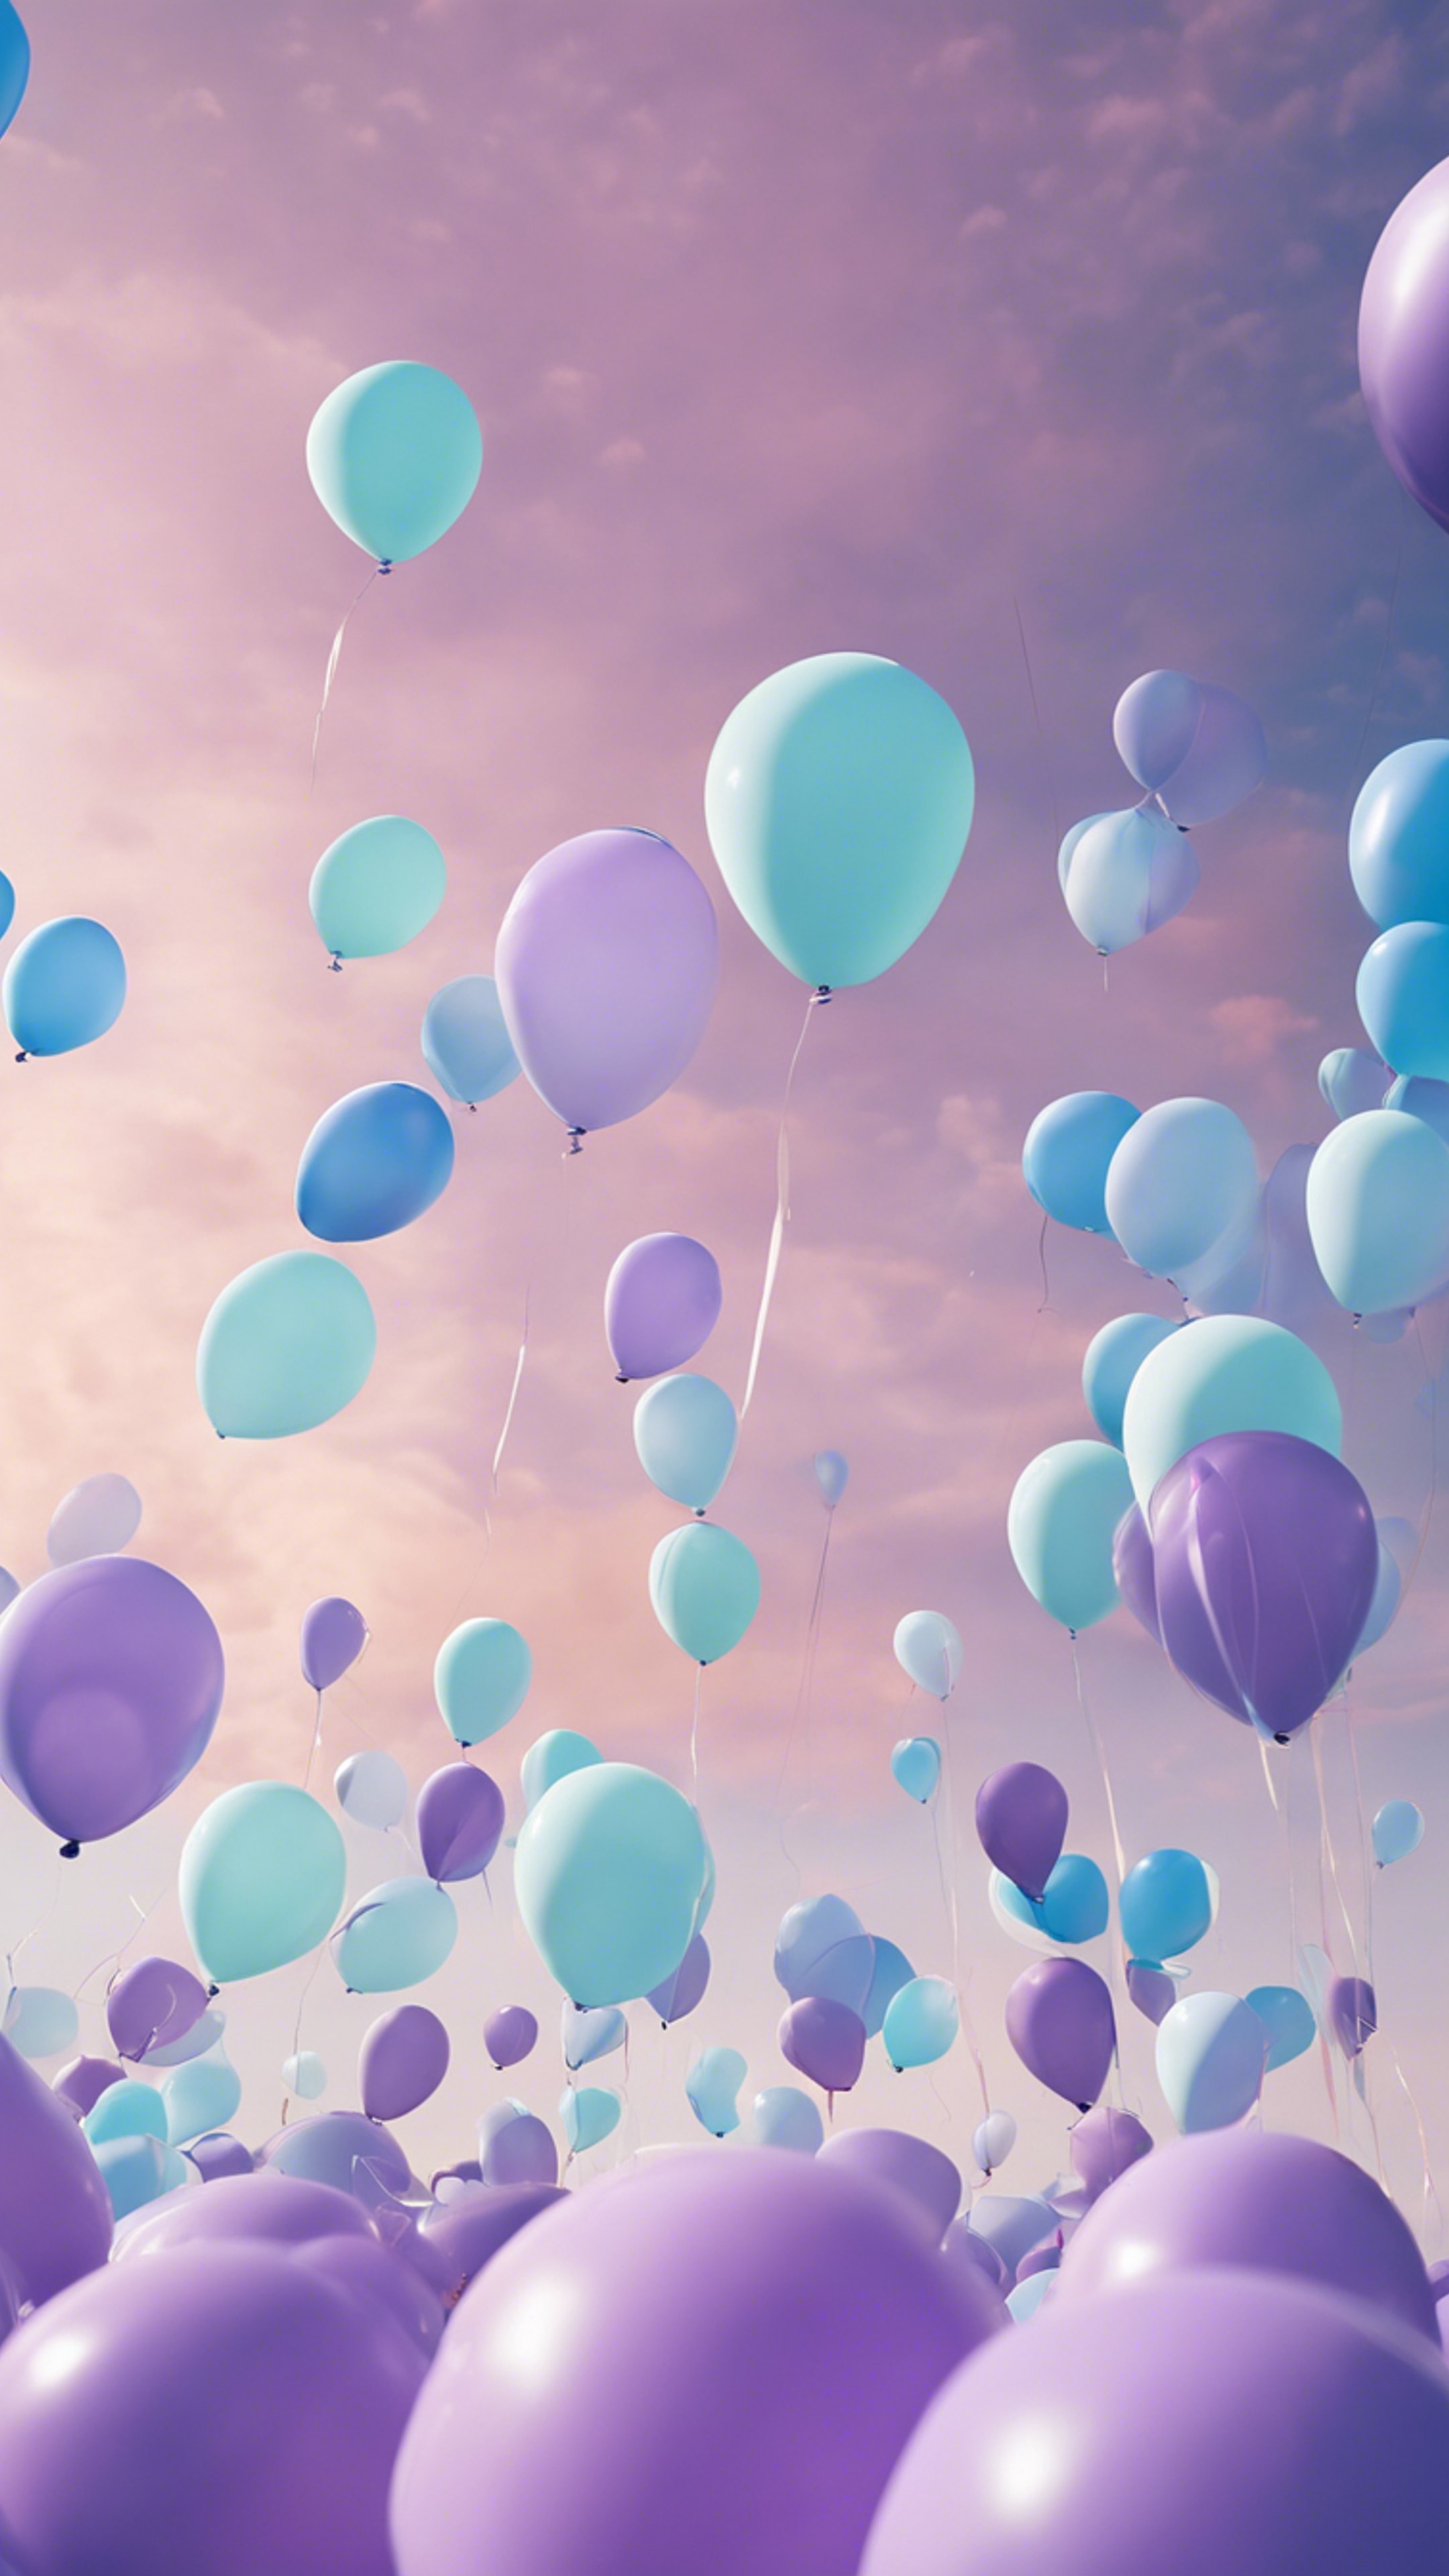 A whimsical scene of pastel purple and blue balloons filling the summer sky. Behang[fd1f8f768f0047c48fb6]